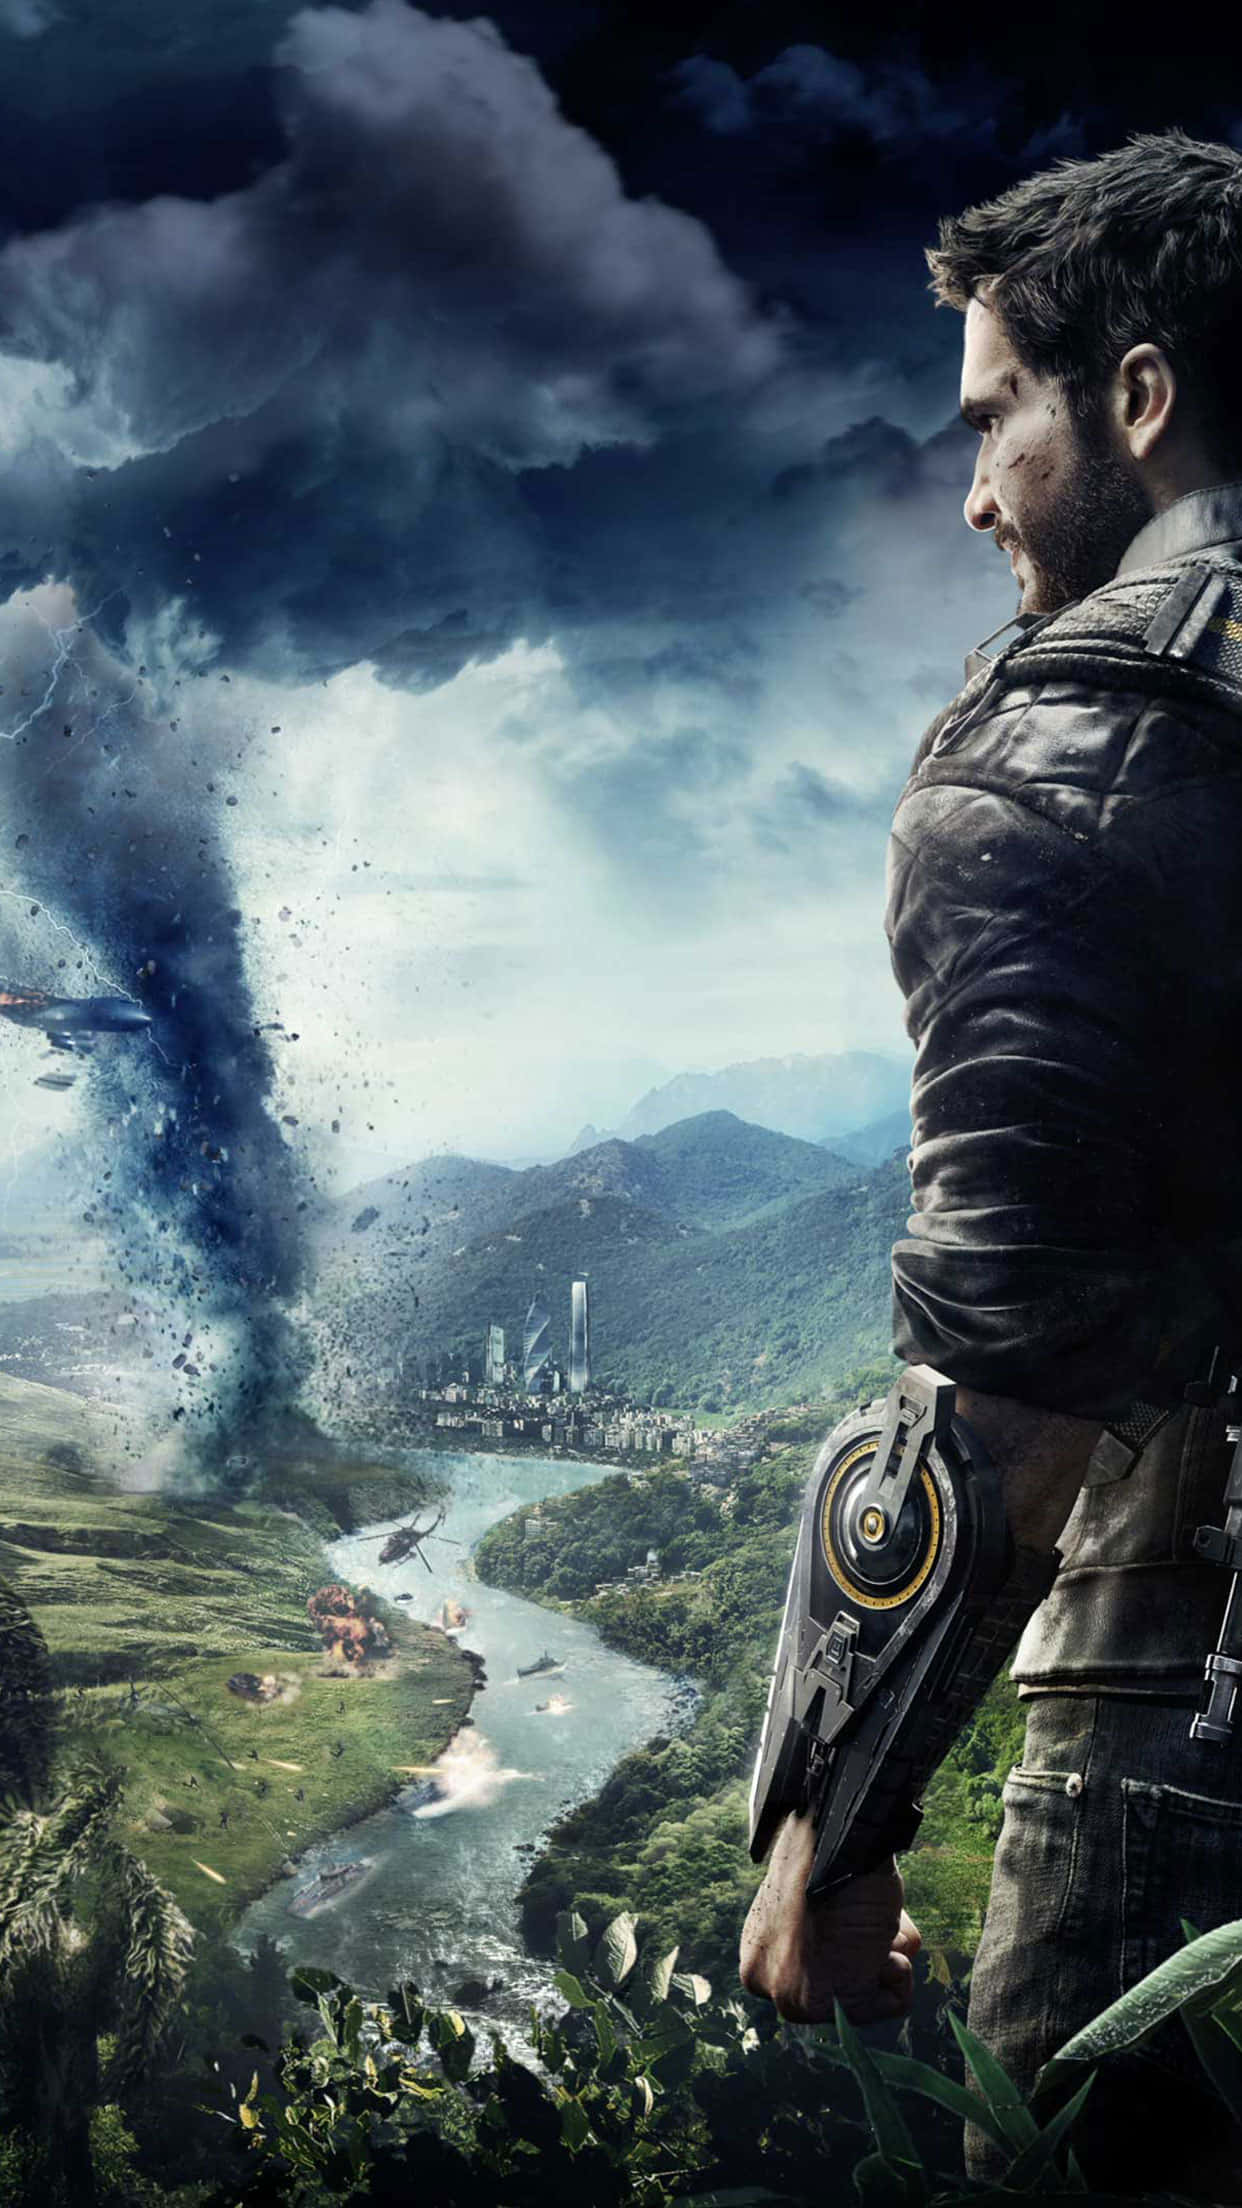 "Explore the thrilling world of Just Cause 4 on your Android device!"